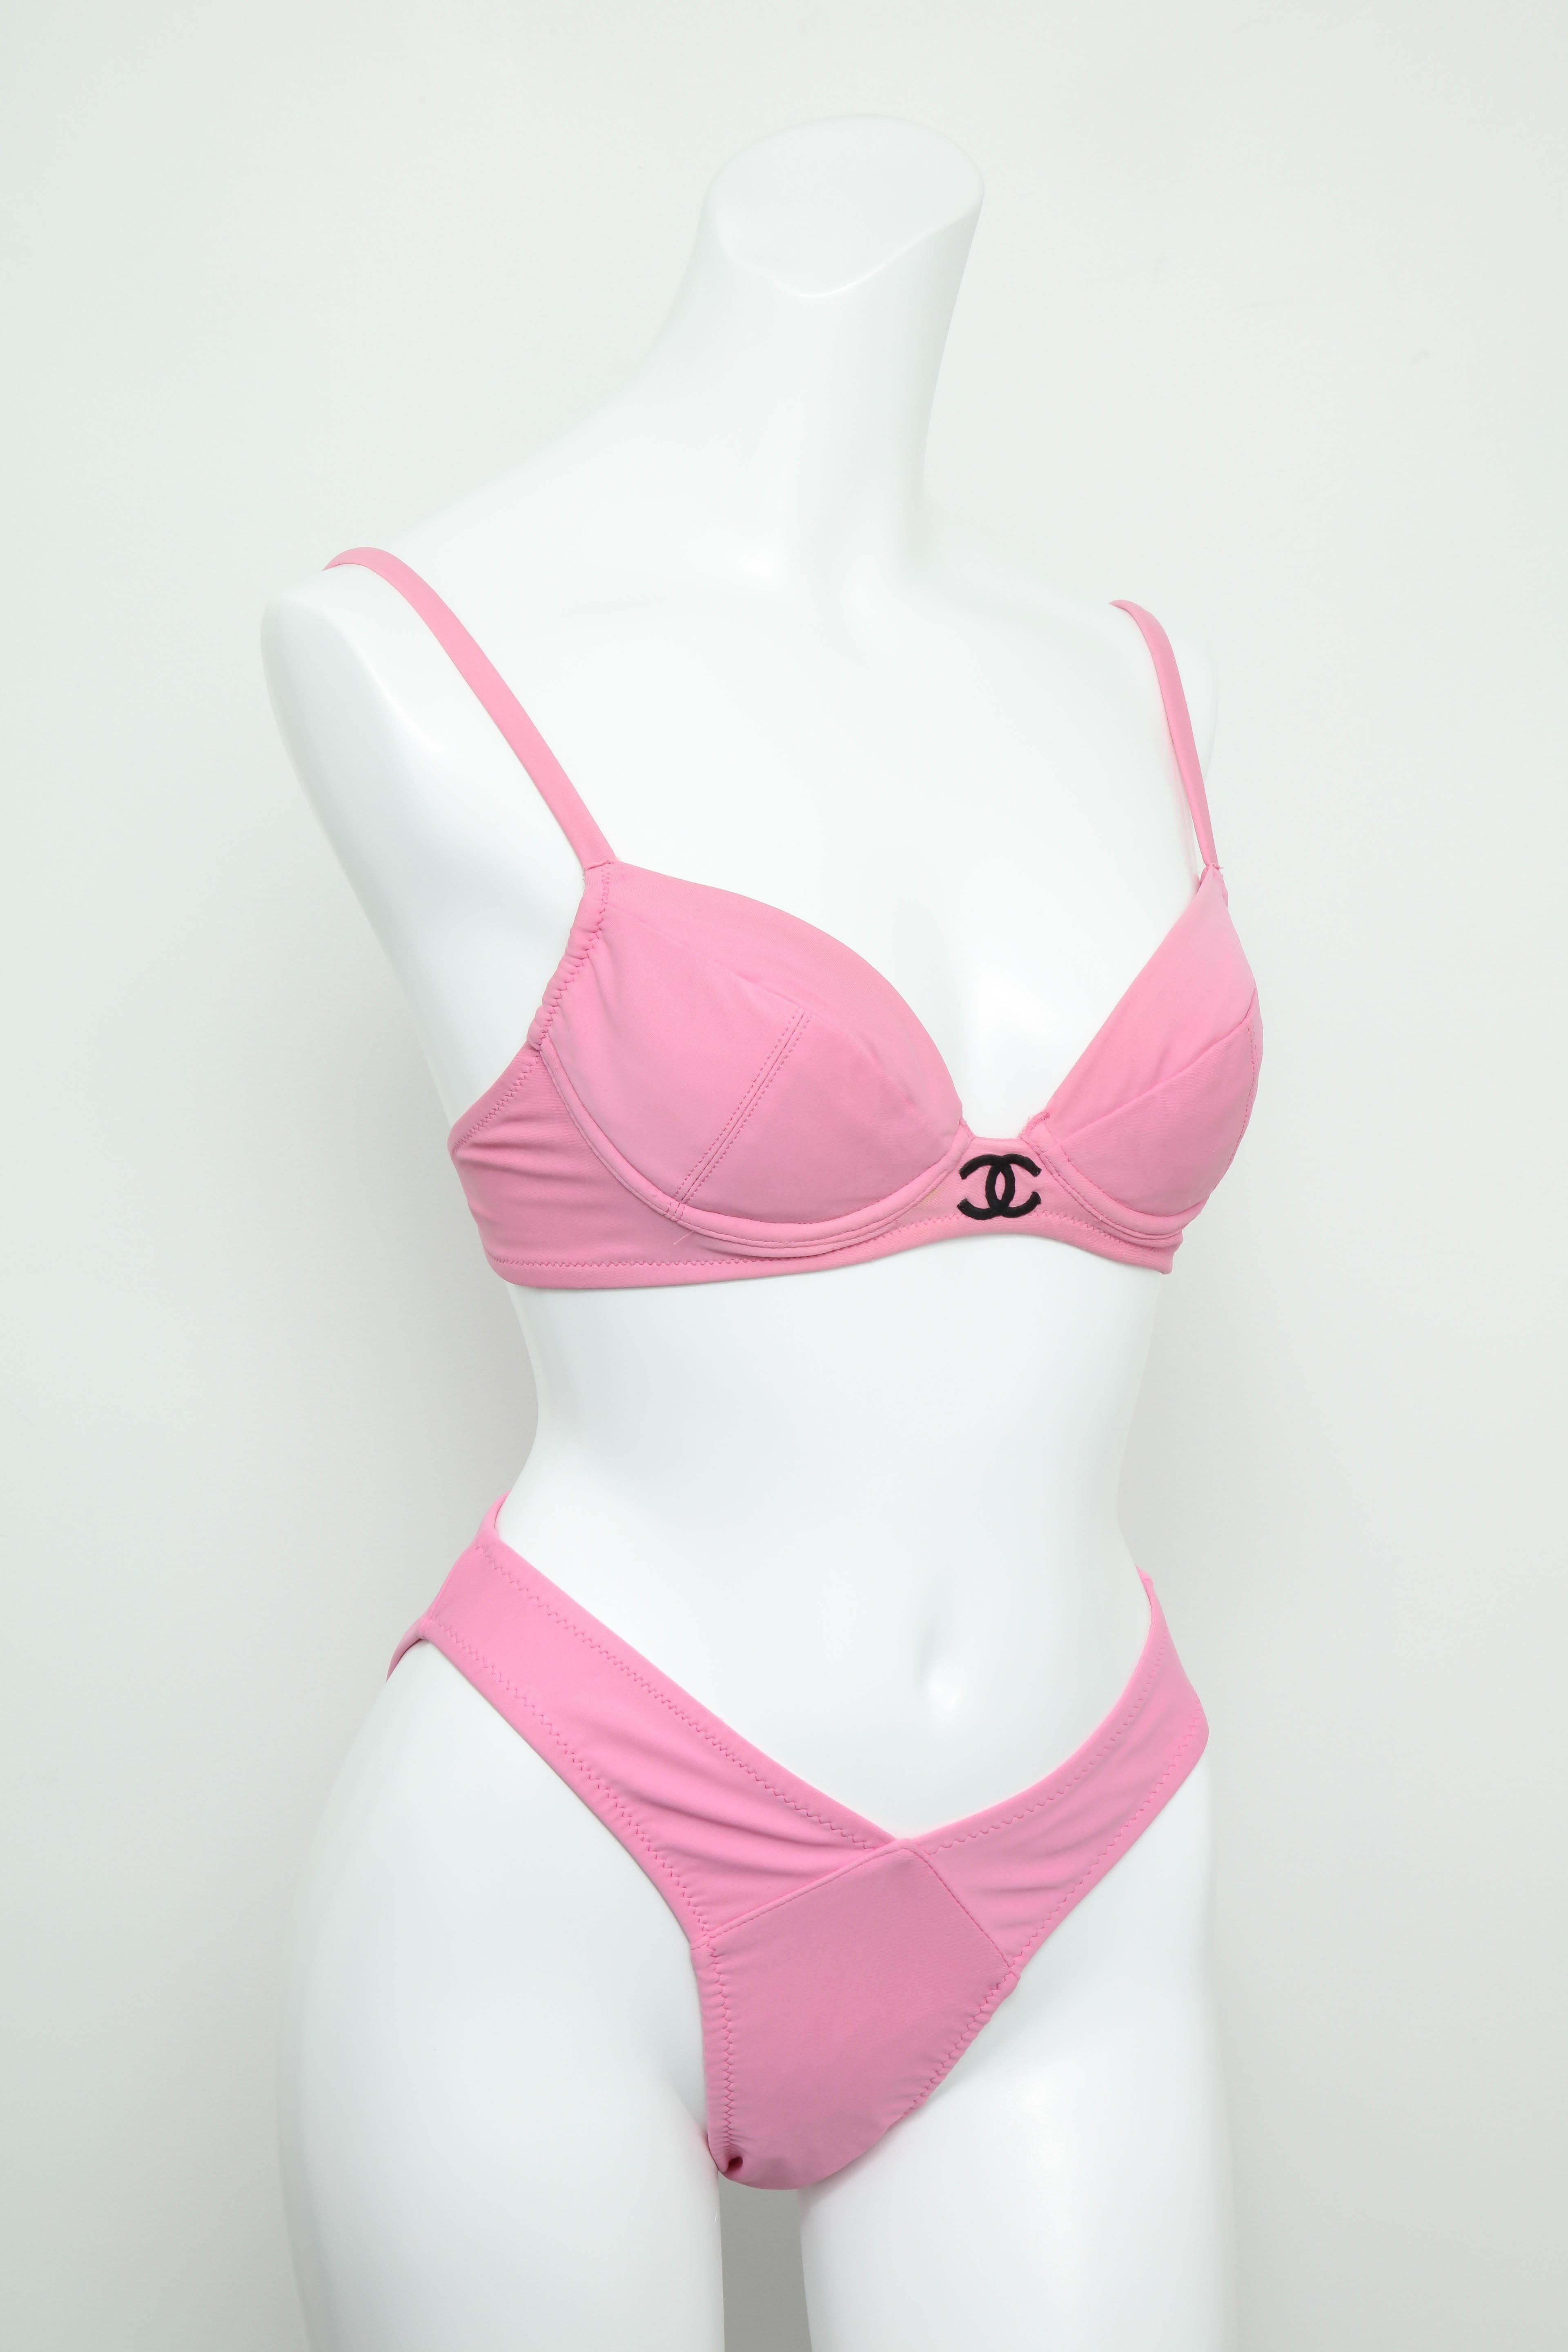 Extremely rare vintage Chanel pink bikini with CC logos. From 1995 spring collection.

Size: 38